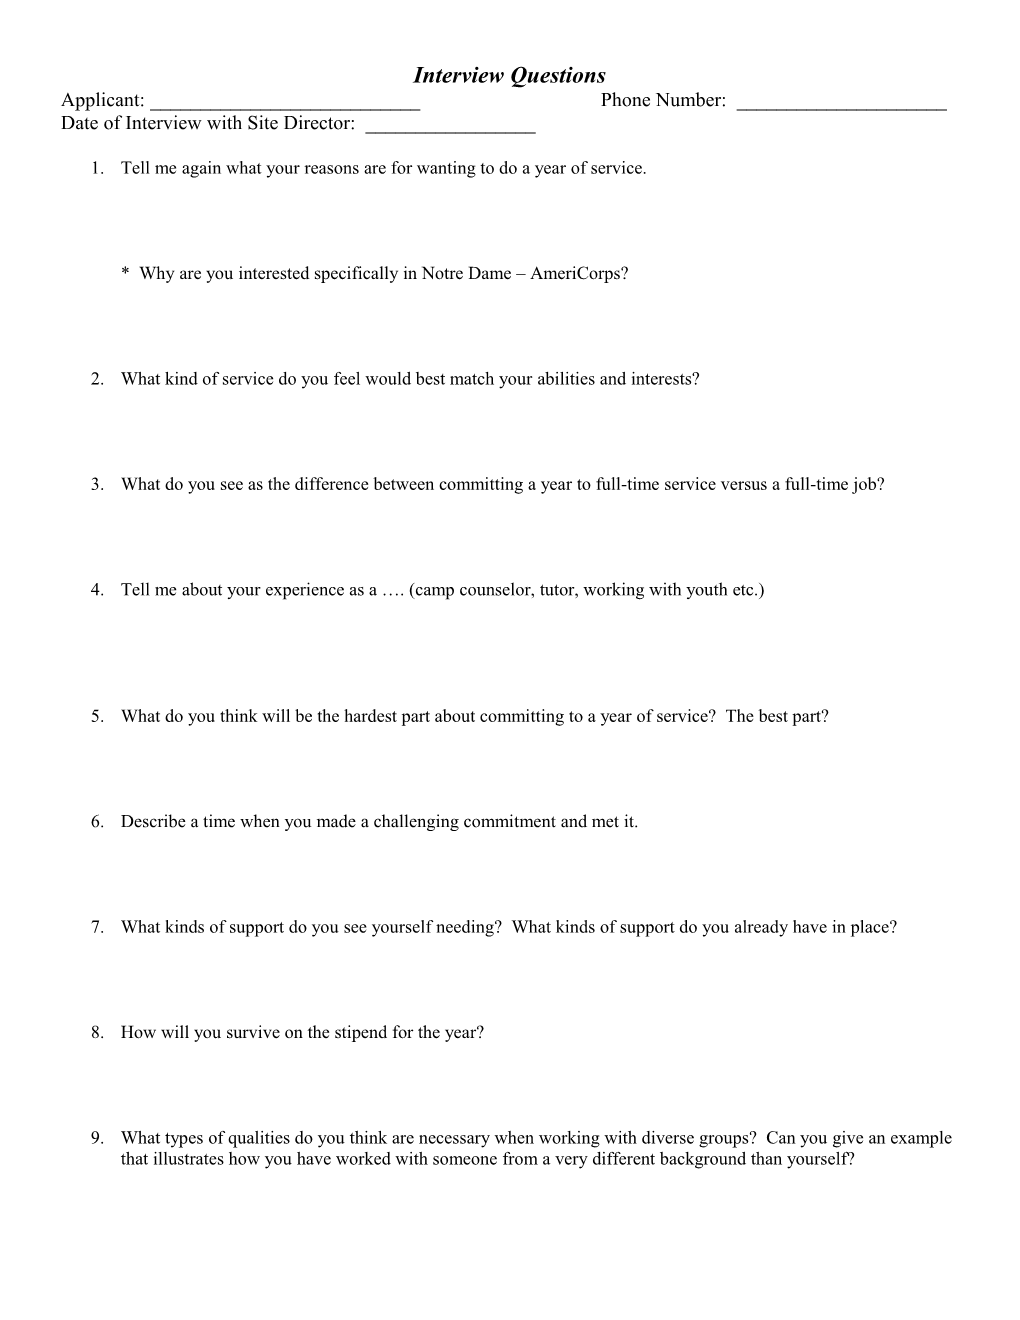 Interview Questions s1